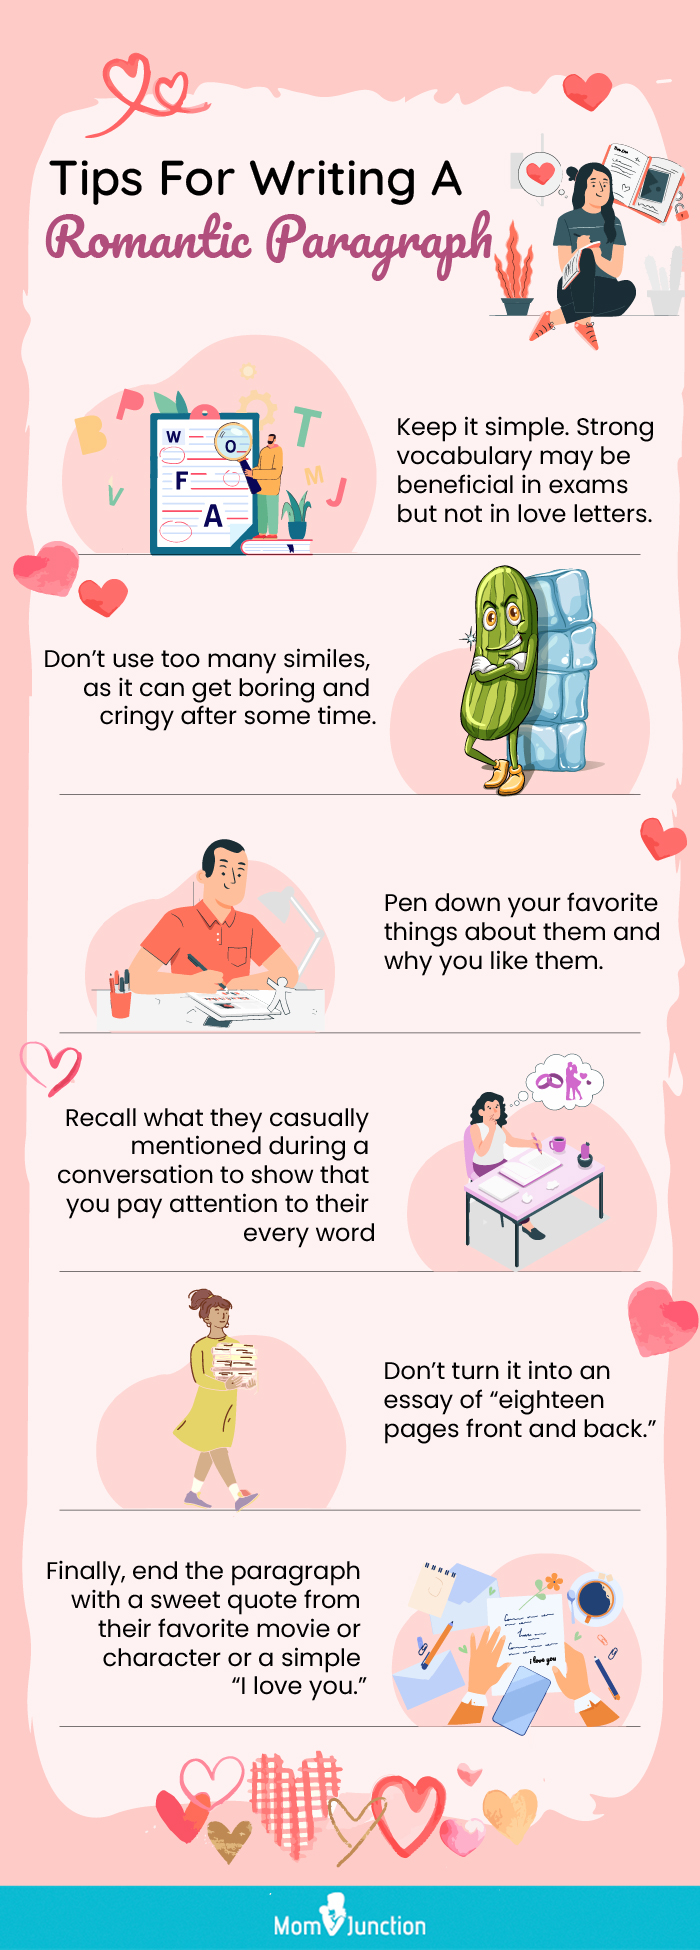 tips on writing a romantic paragraph (infographic)